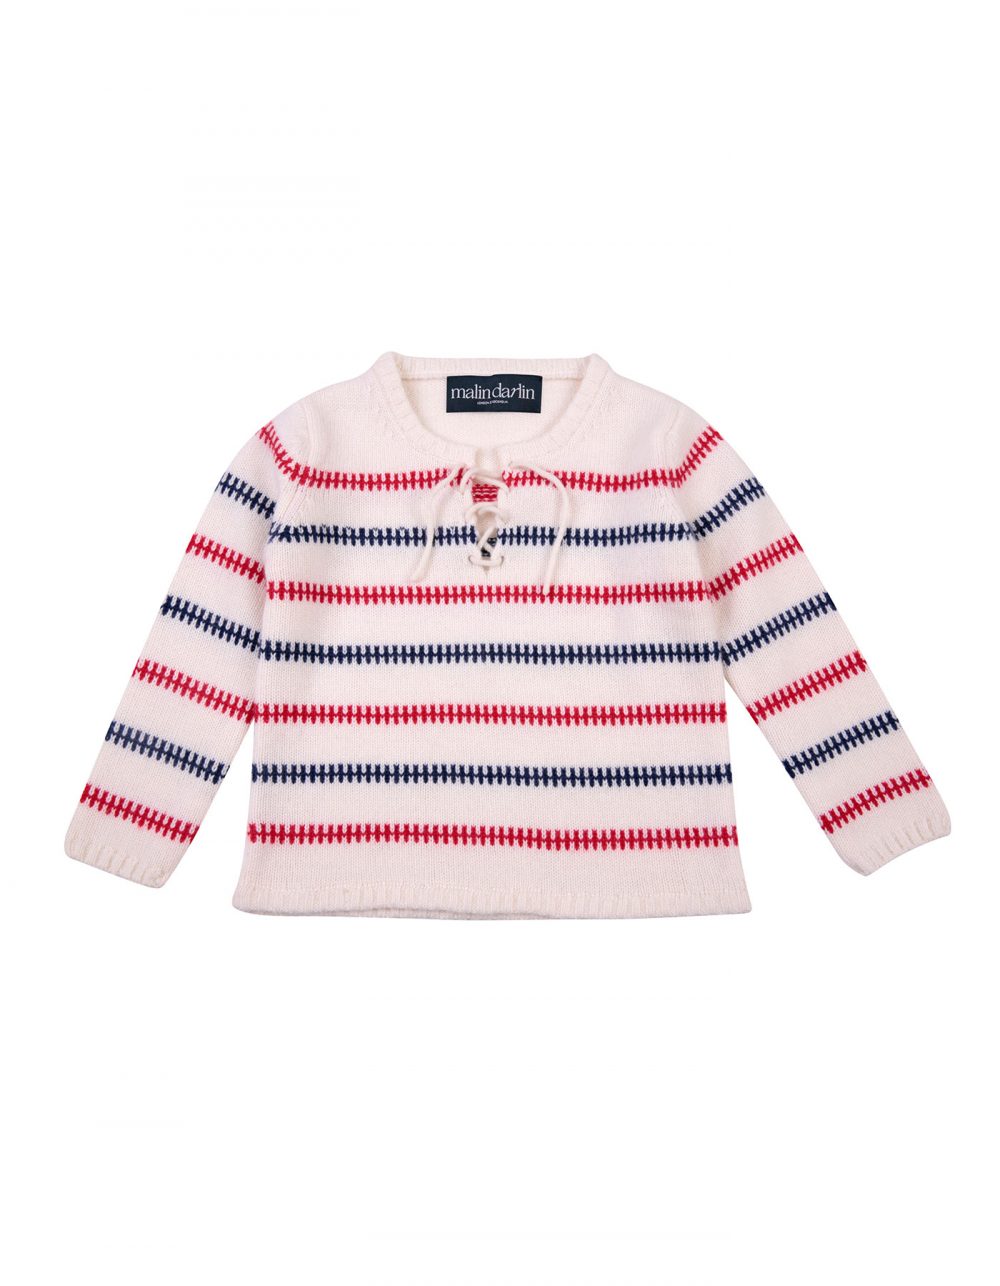 The Baby Fisher kids cashmere jumper laid flat against a white background.